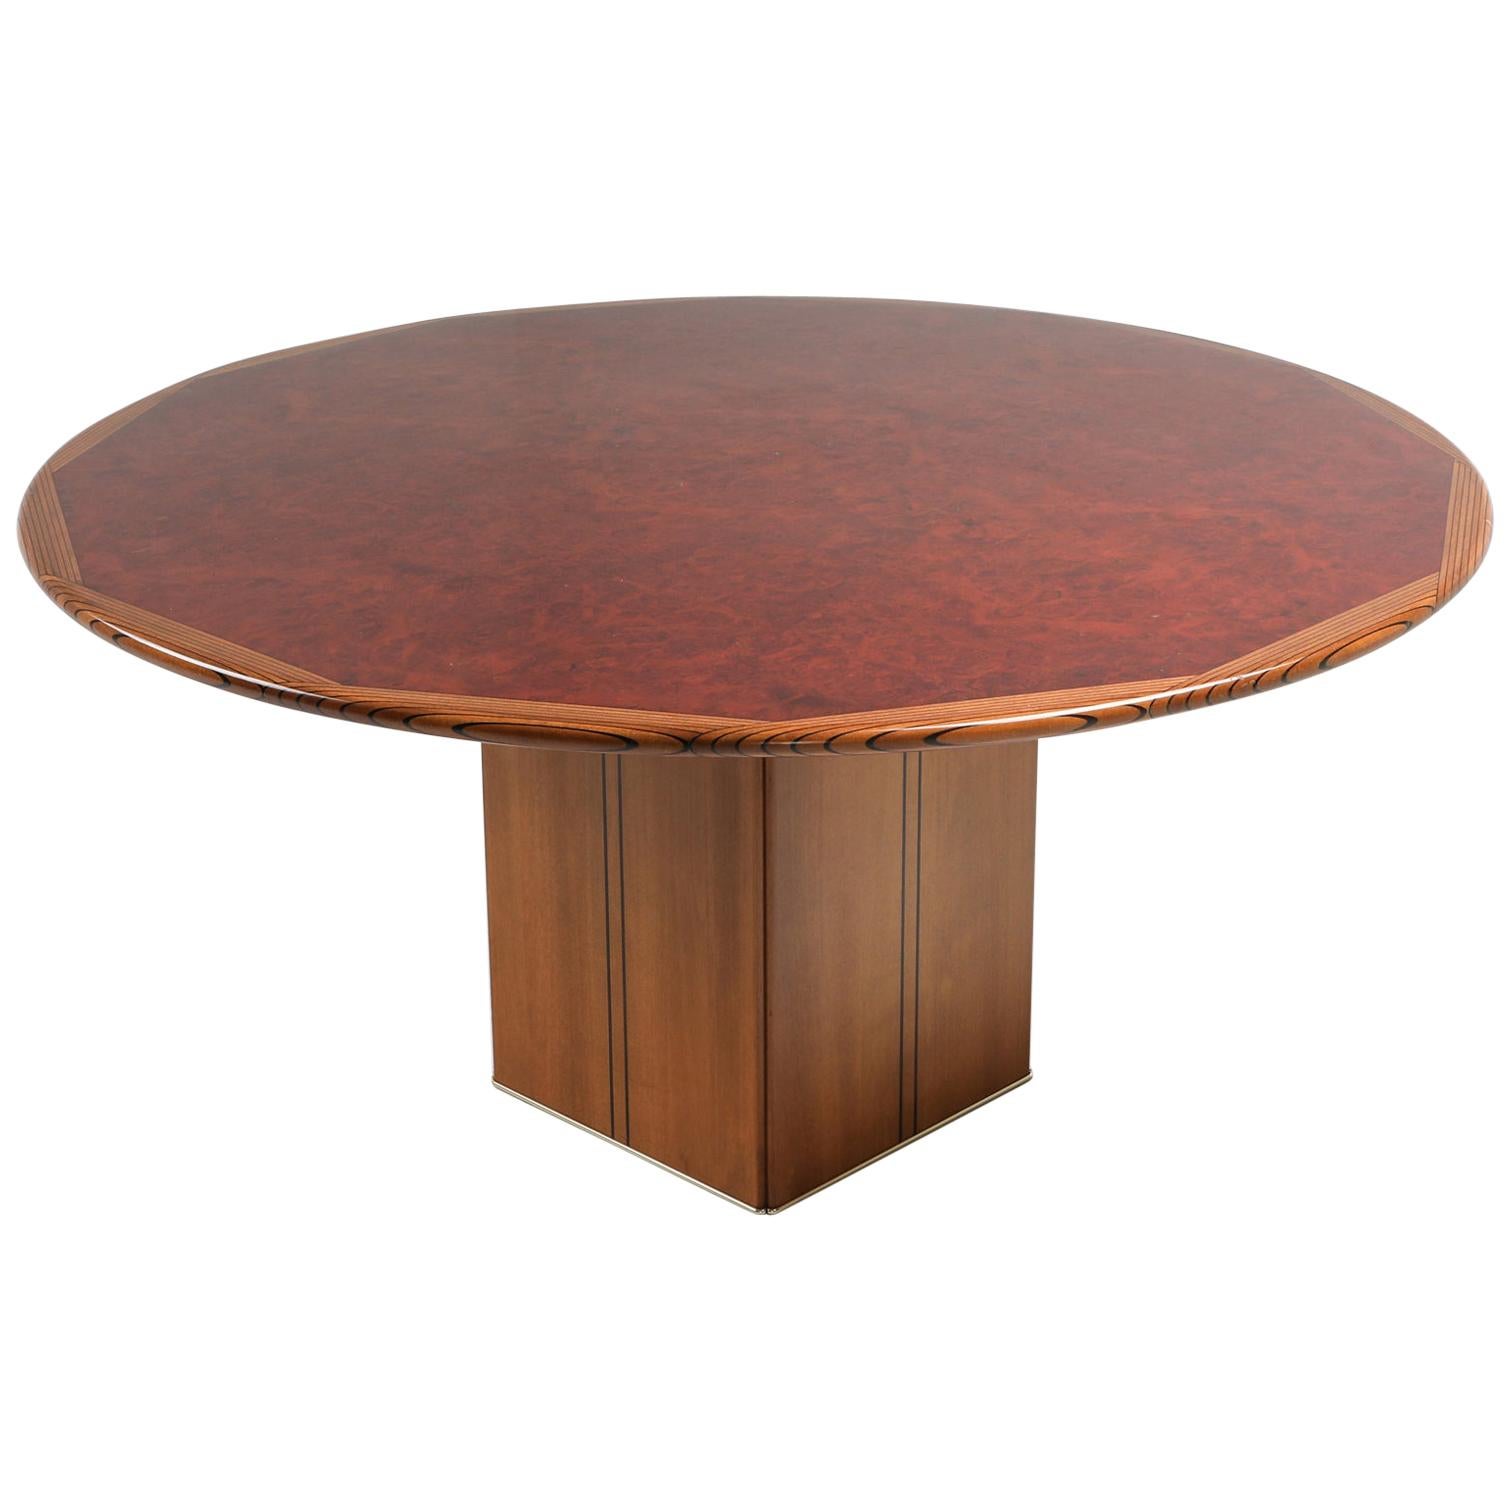 Artona 'Africa' Dining Table by Afra and Tobia Scarpa